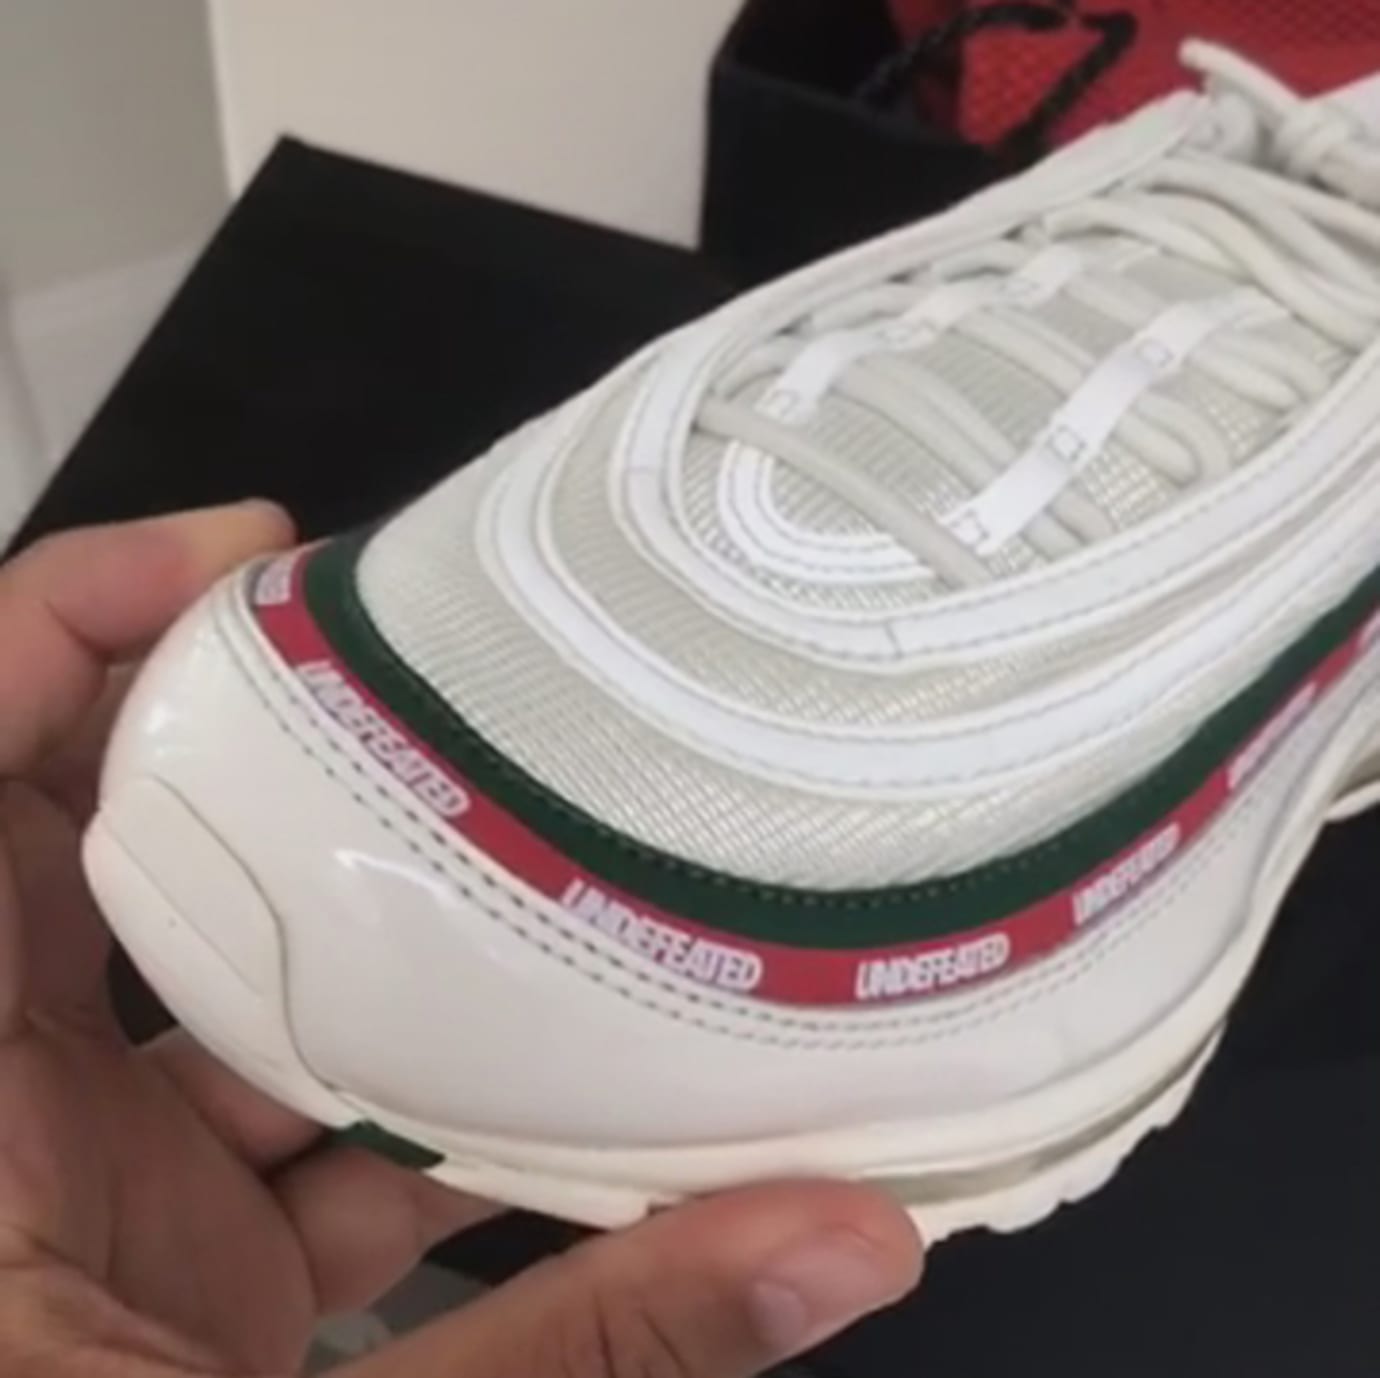 recurso esférico Remo Undefeated Nike Air Max 97 Sail White Gorge Green Speed Red AJ1986-100 |  Sole Collector